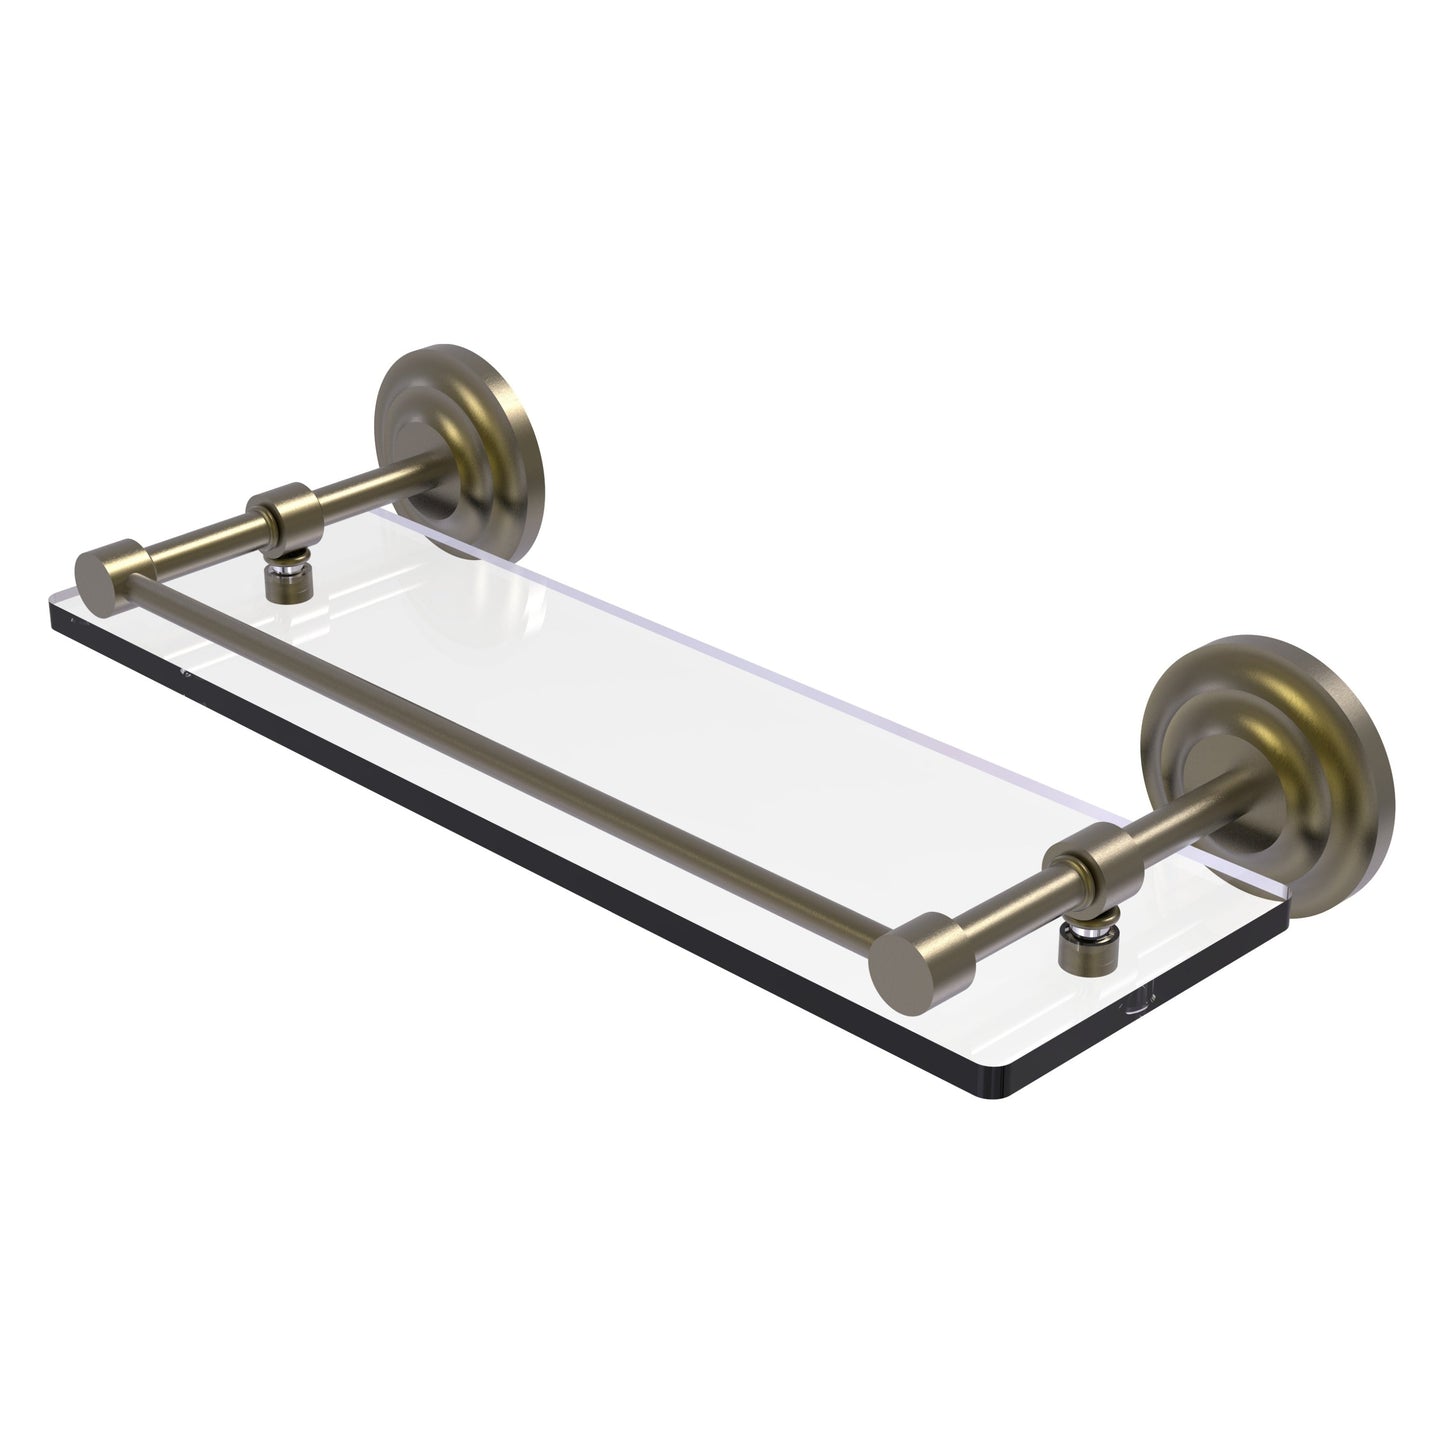 Allied Brass Que New 16" x 5" Antique Brass Solid Brass 16-Inch Tempered Glass Shelf With Gallery Rail